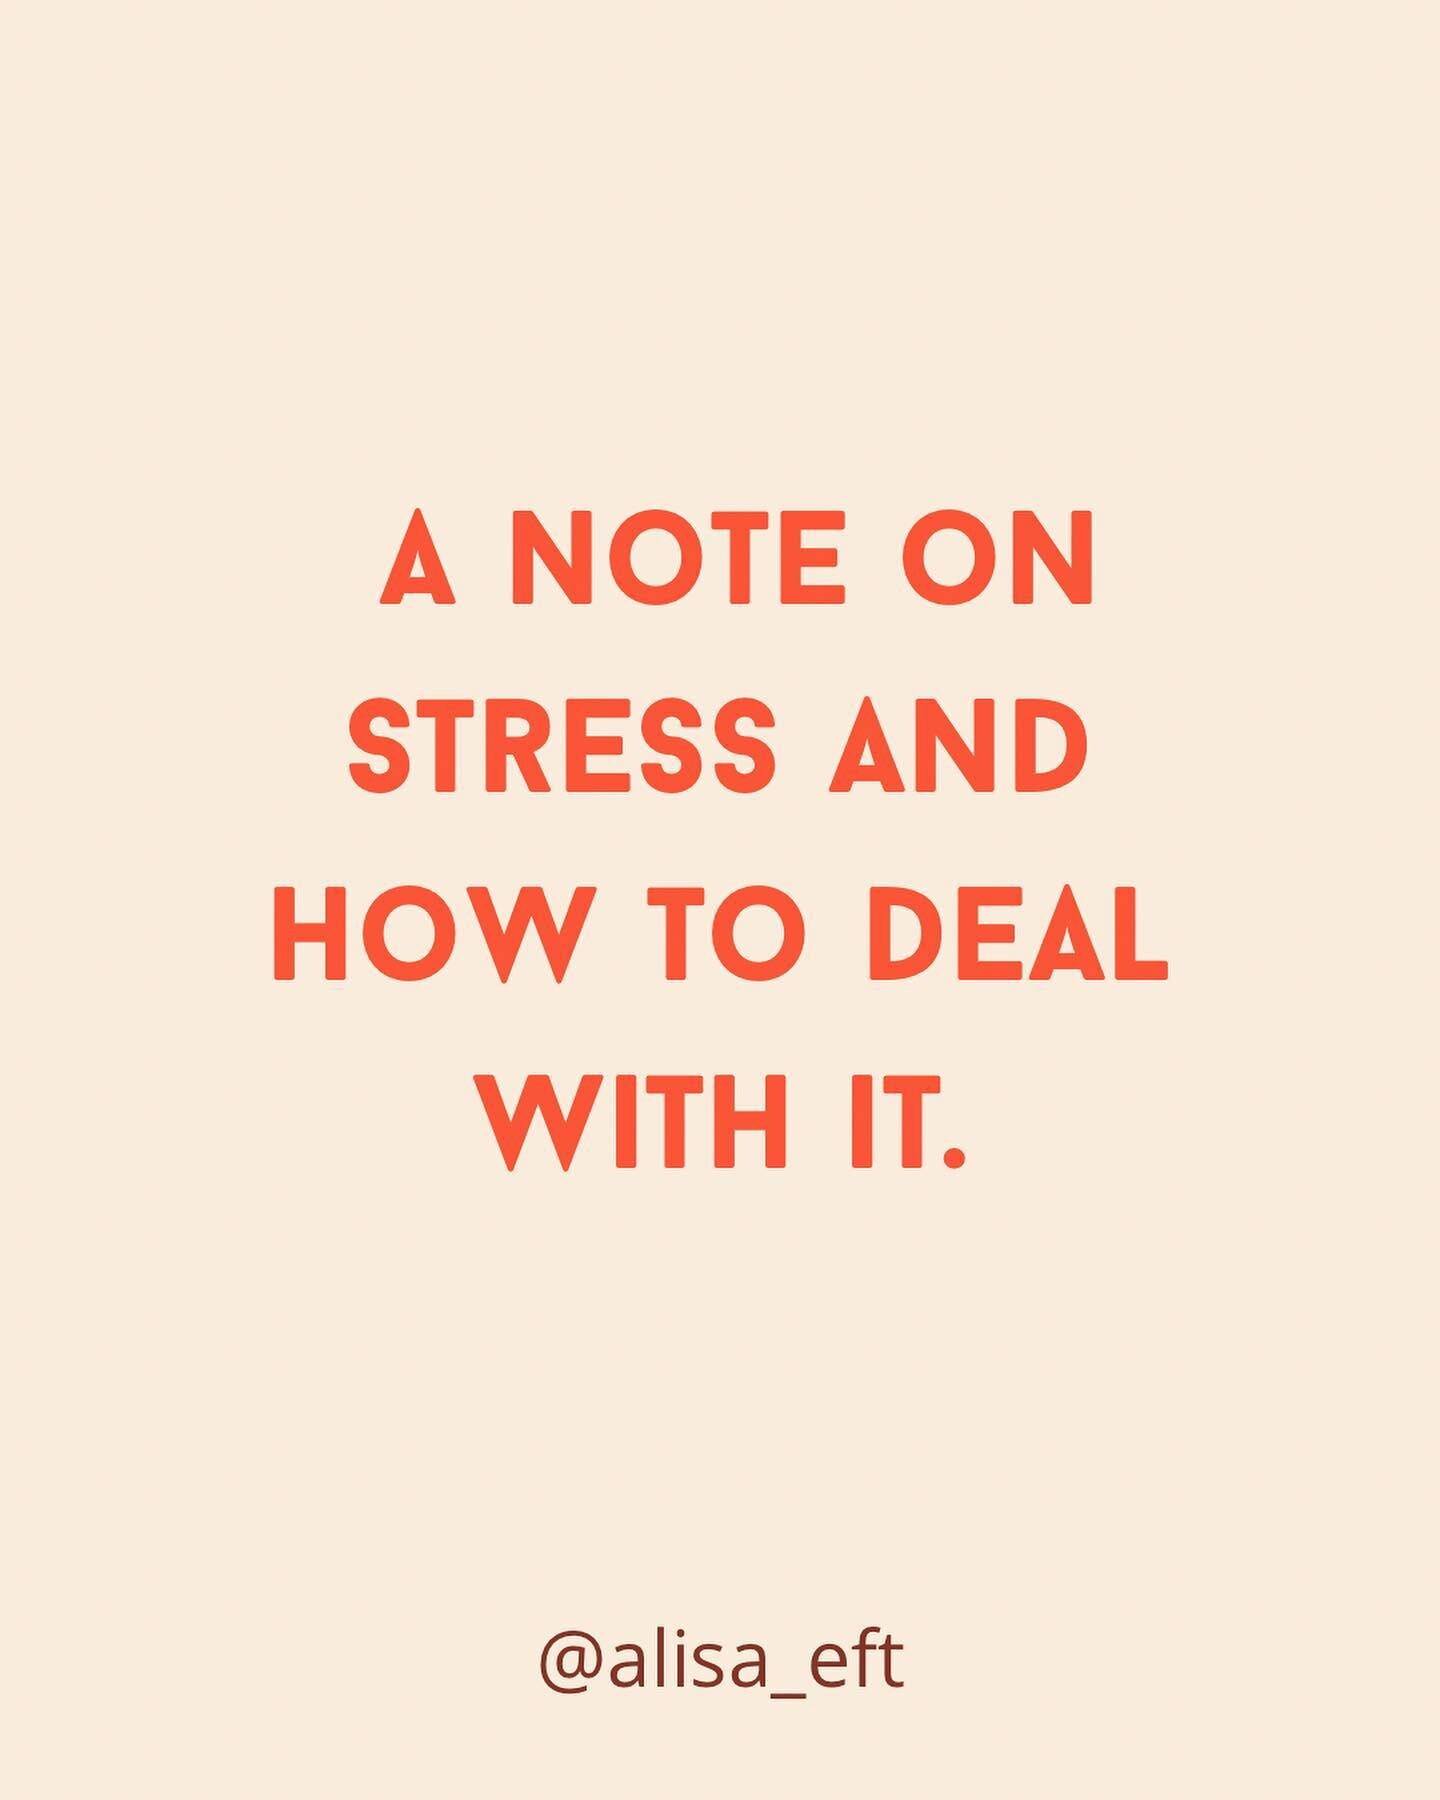 Tension in your shoulders and neck? Feeling nauseated? Tight knot in your stomach area? Sweaty palms and a prominent speedy heart beat? 😰 

Yup. It&rsquo;s your nervous system getting into that familiar state of stress, preparing for fight, flight a